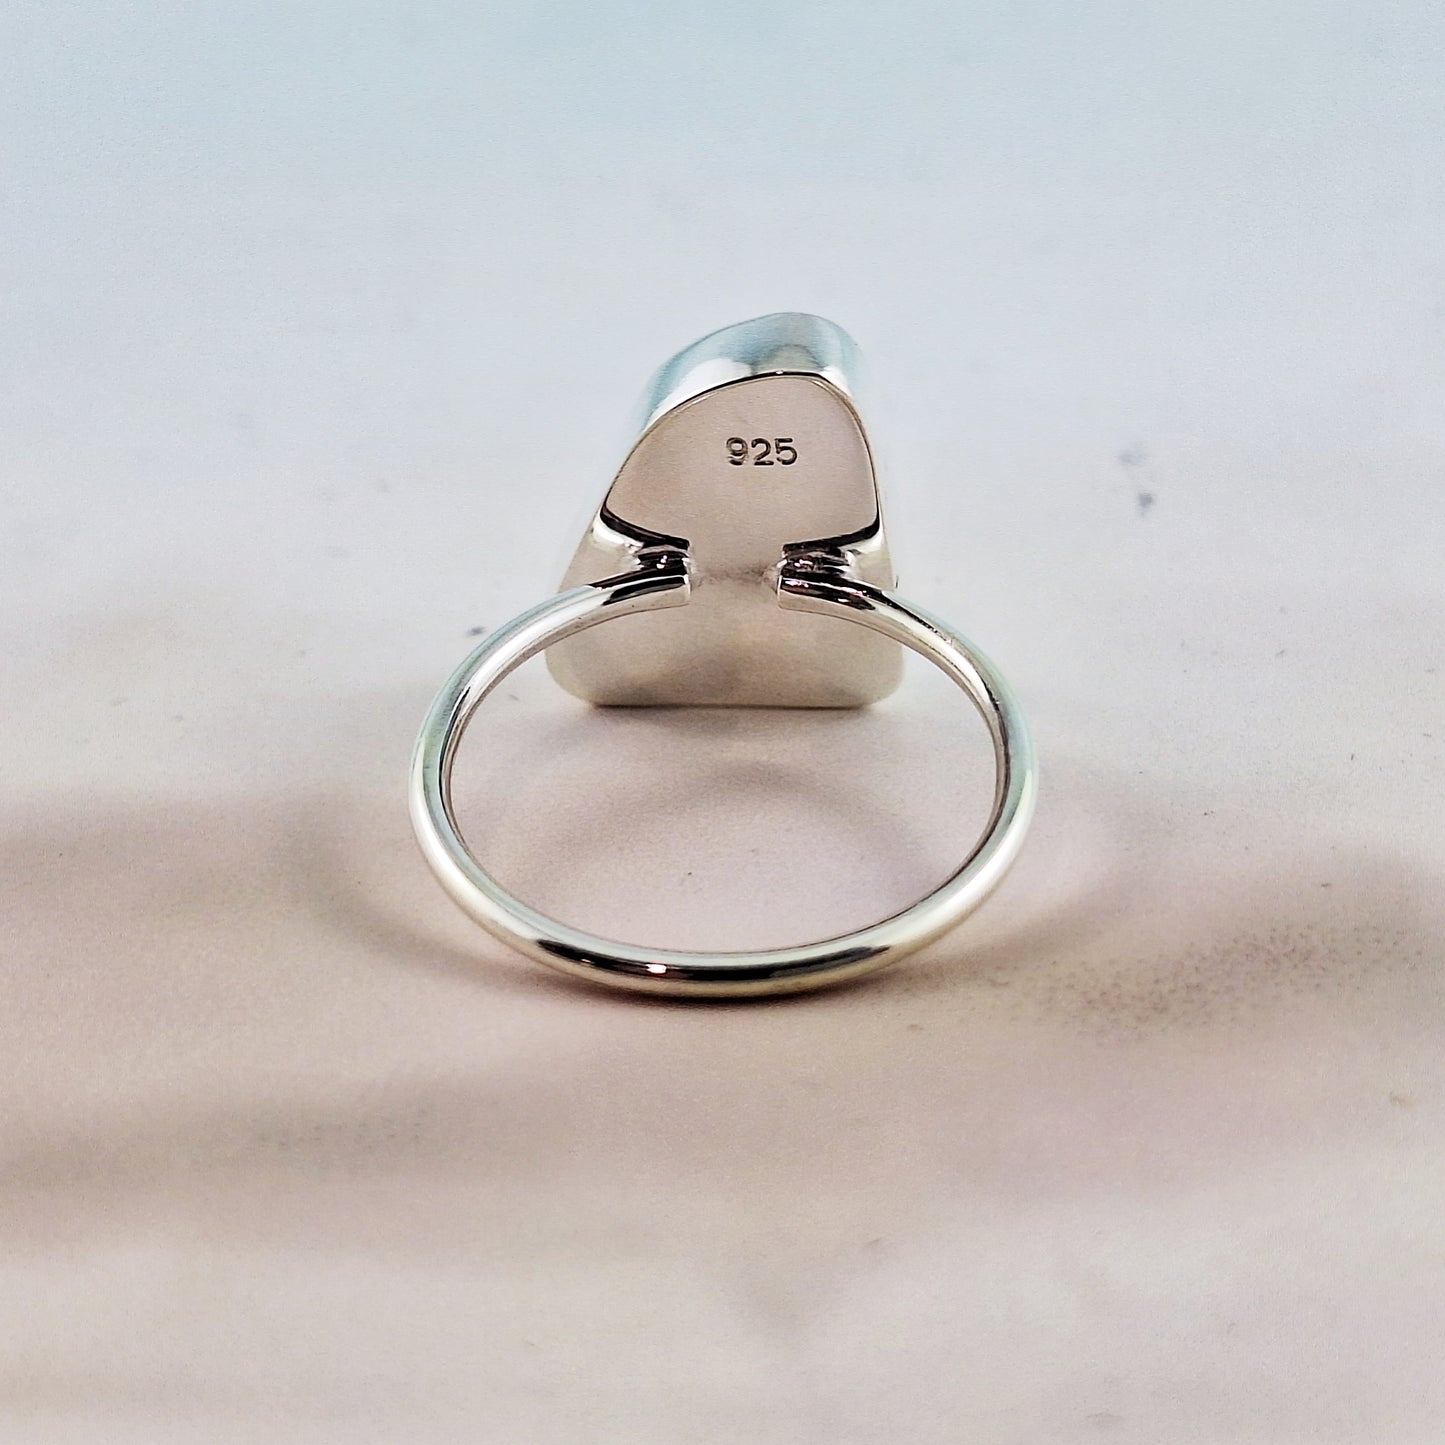 Ring size 9: Sea Mist Glass